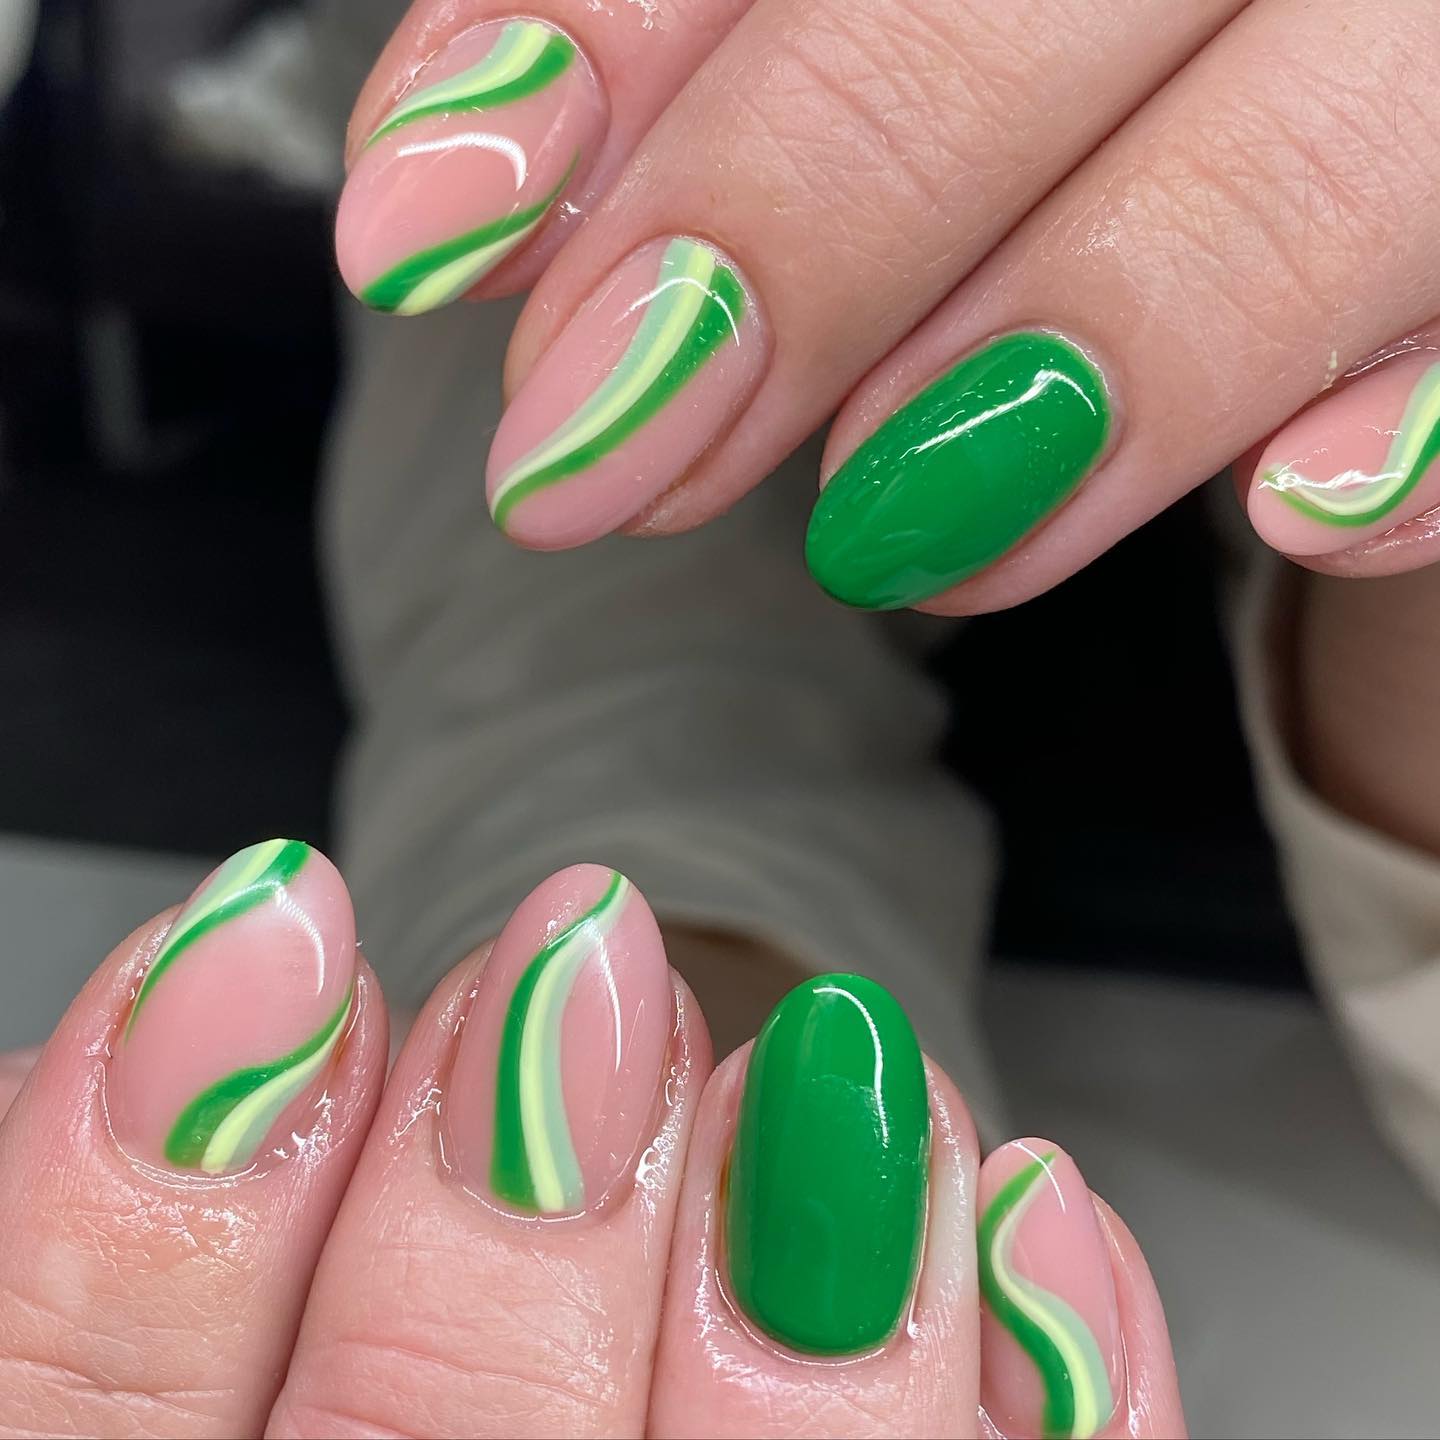 For those who like nail arts more than just classic and plain nails, here is a great look for you. You can use different shades of green on top of your nude nails.